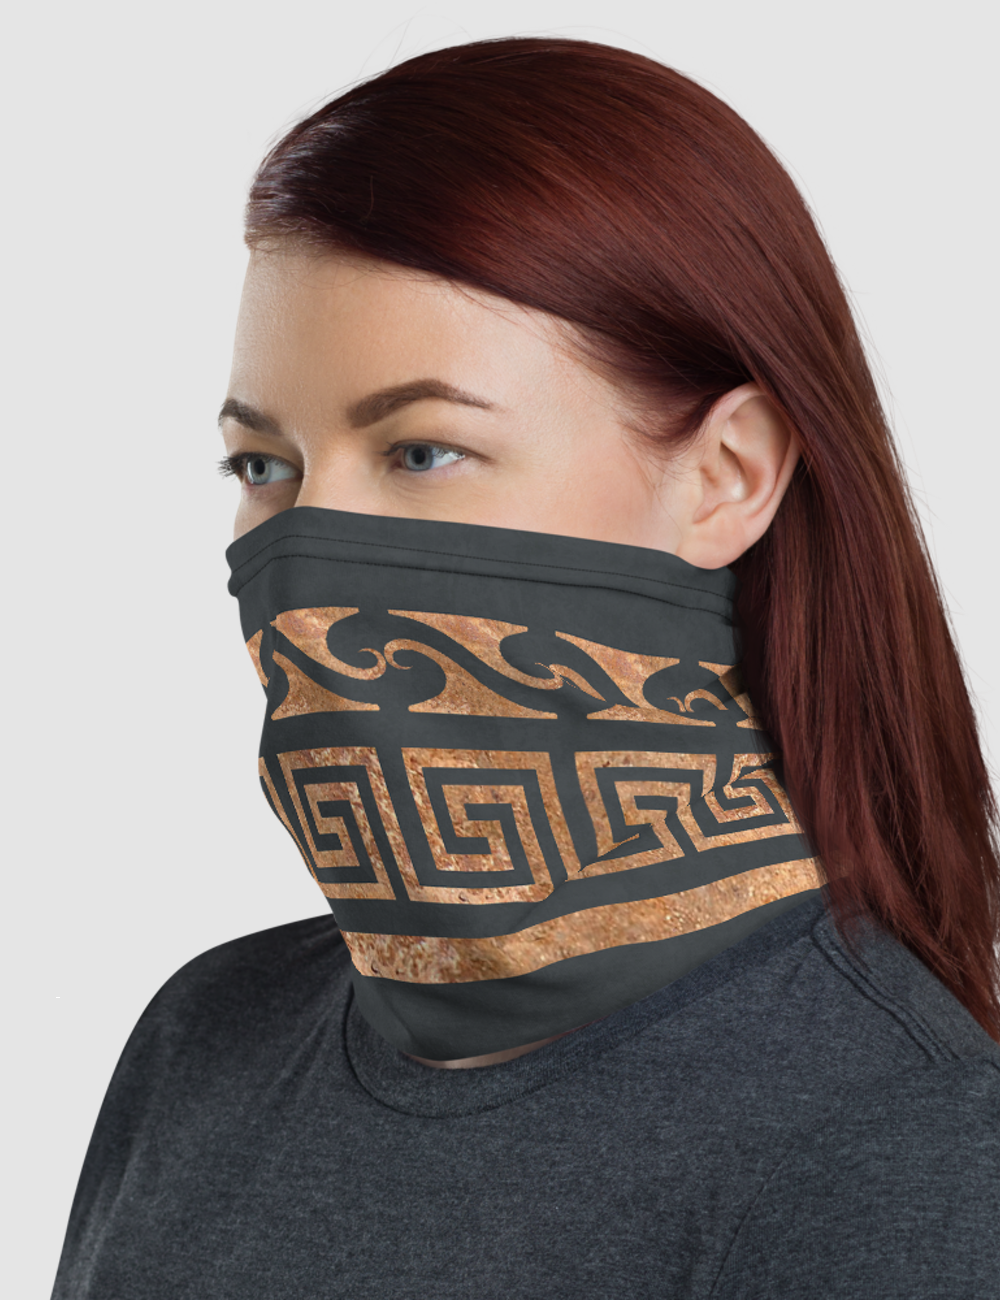 Thick Rustic Gold Ionic Belt | Neck Gaiter Face Mask OniTakai